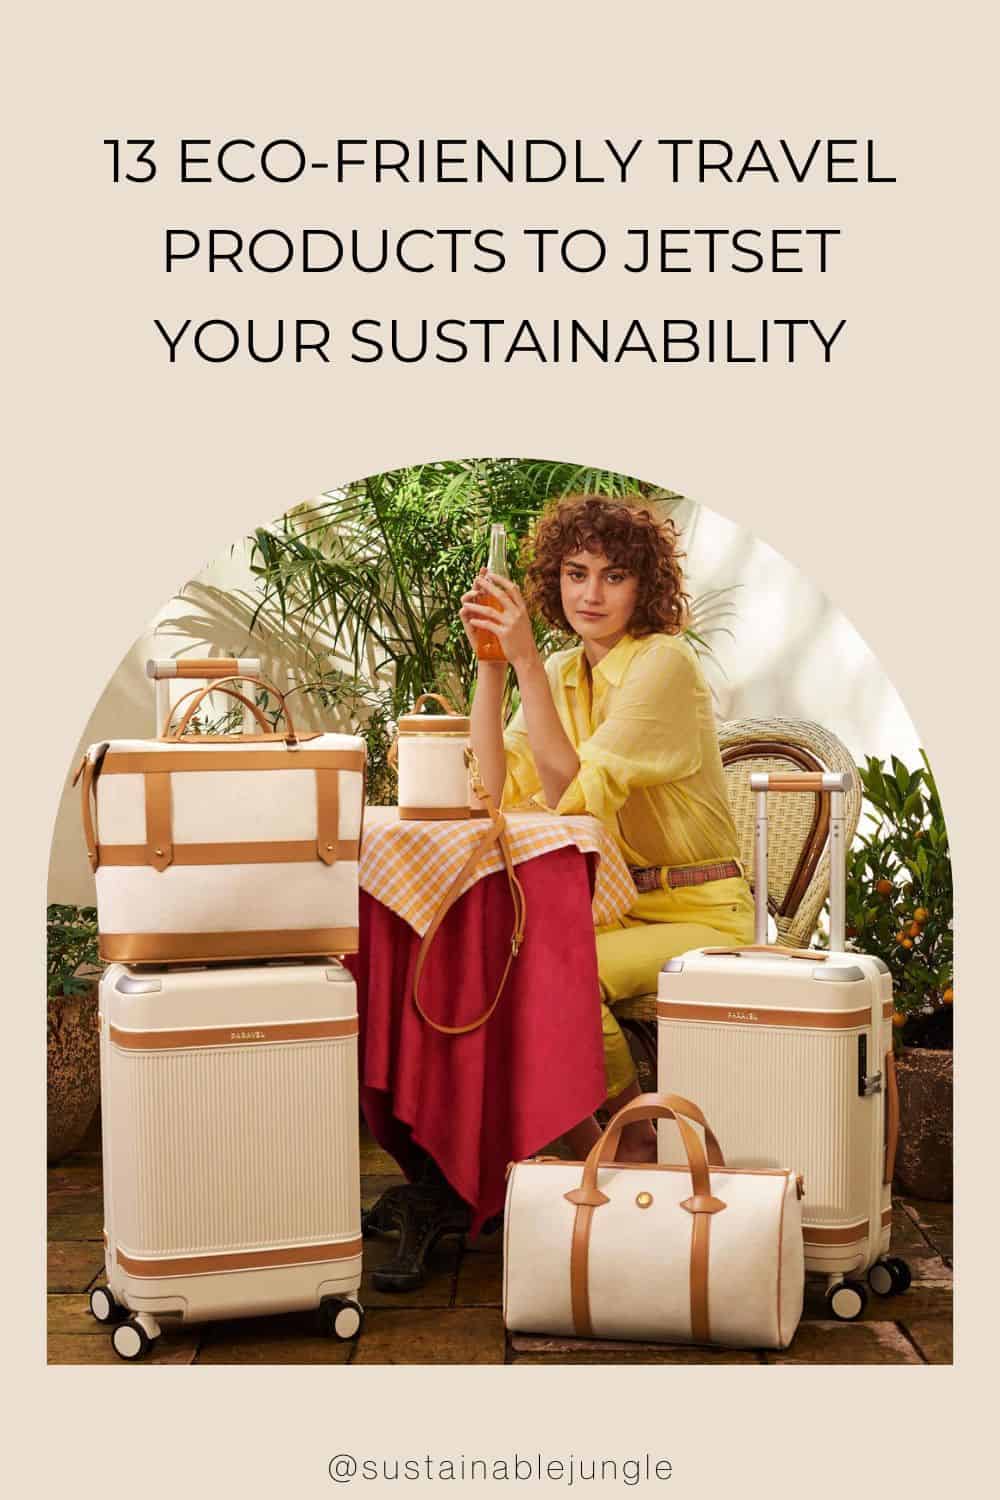 13 Eco-Friendly Travel Products To Jetset Your Sustainability Image by Paravel #ecofriendlytravelproducts #ecofriendlytravelcontainers #ecofriendlyproductstravel #sustainabletravelproducts #sustainabletravelkit #sustainablejungle